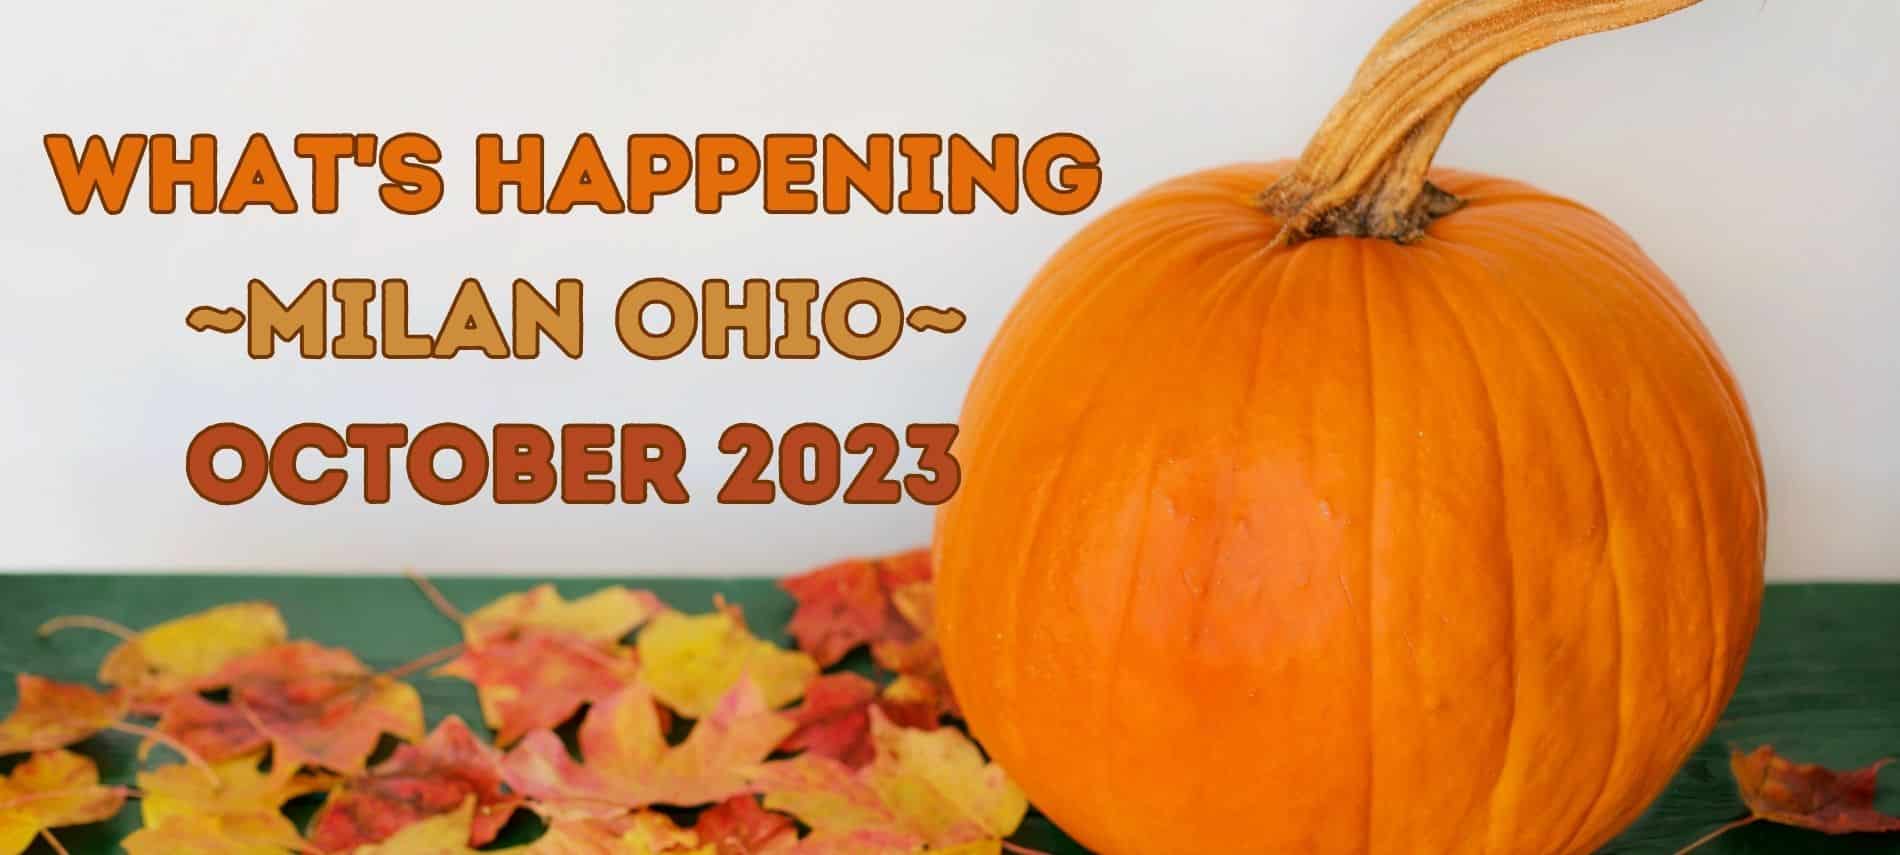 Small pumpkin on a bed a fall leaves with white background - text says "What's Happening, Milan Ohio, October 2023"